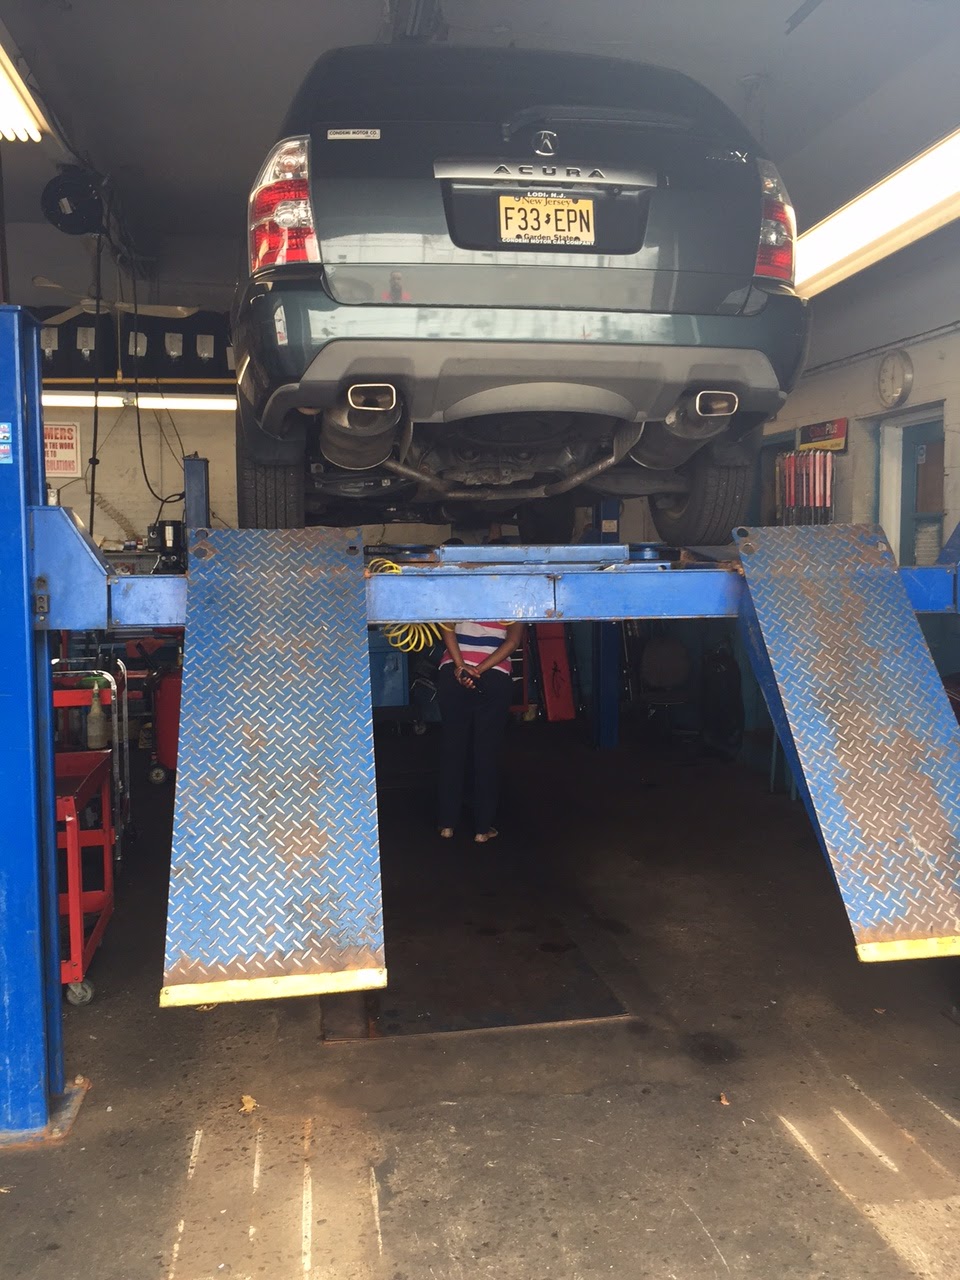 Abel Auto Repair | 7 2nd Ave, Paterson, NJ 07524, USA | Phone: (973) 321-8414